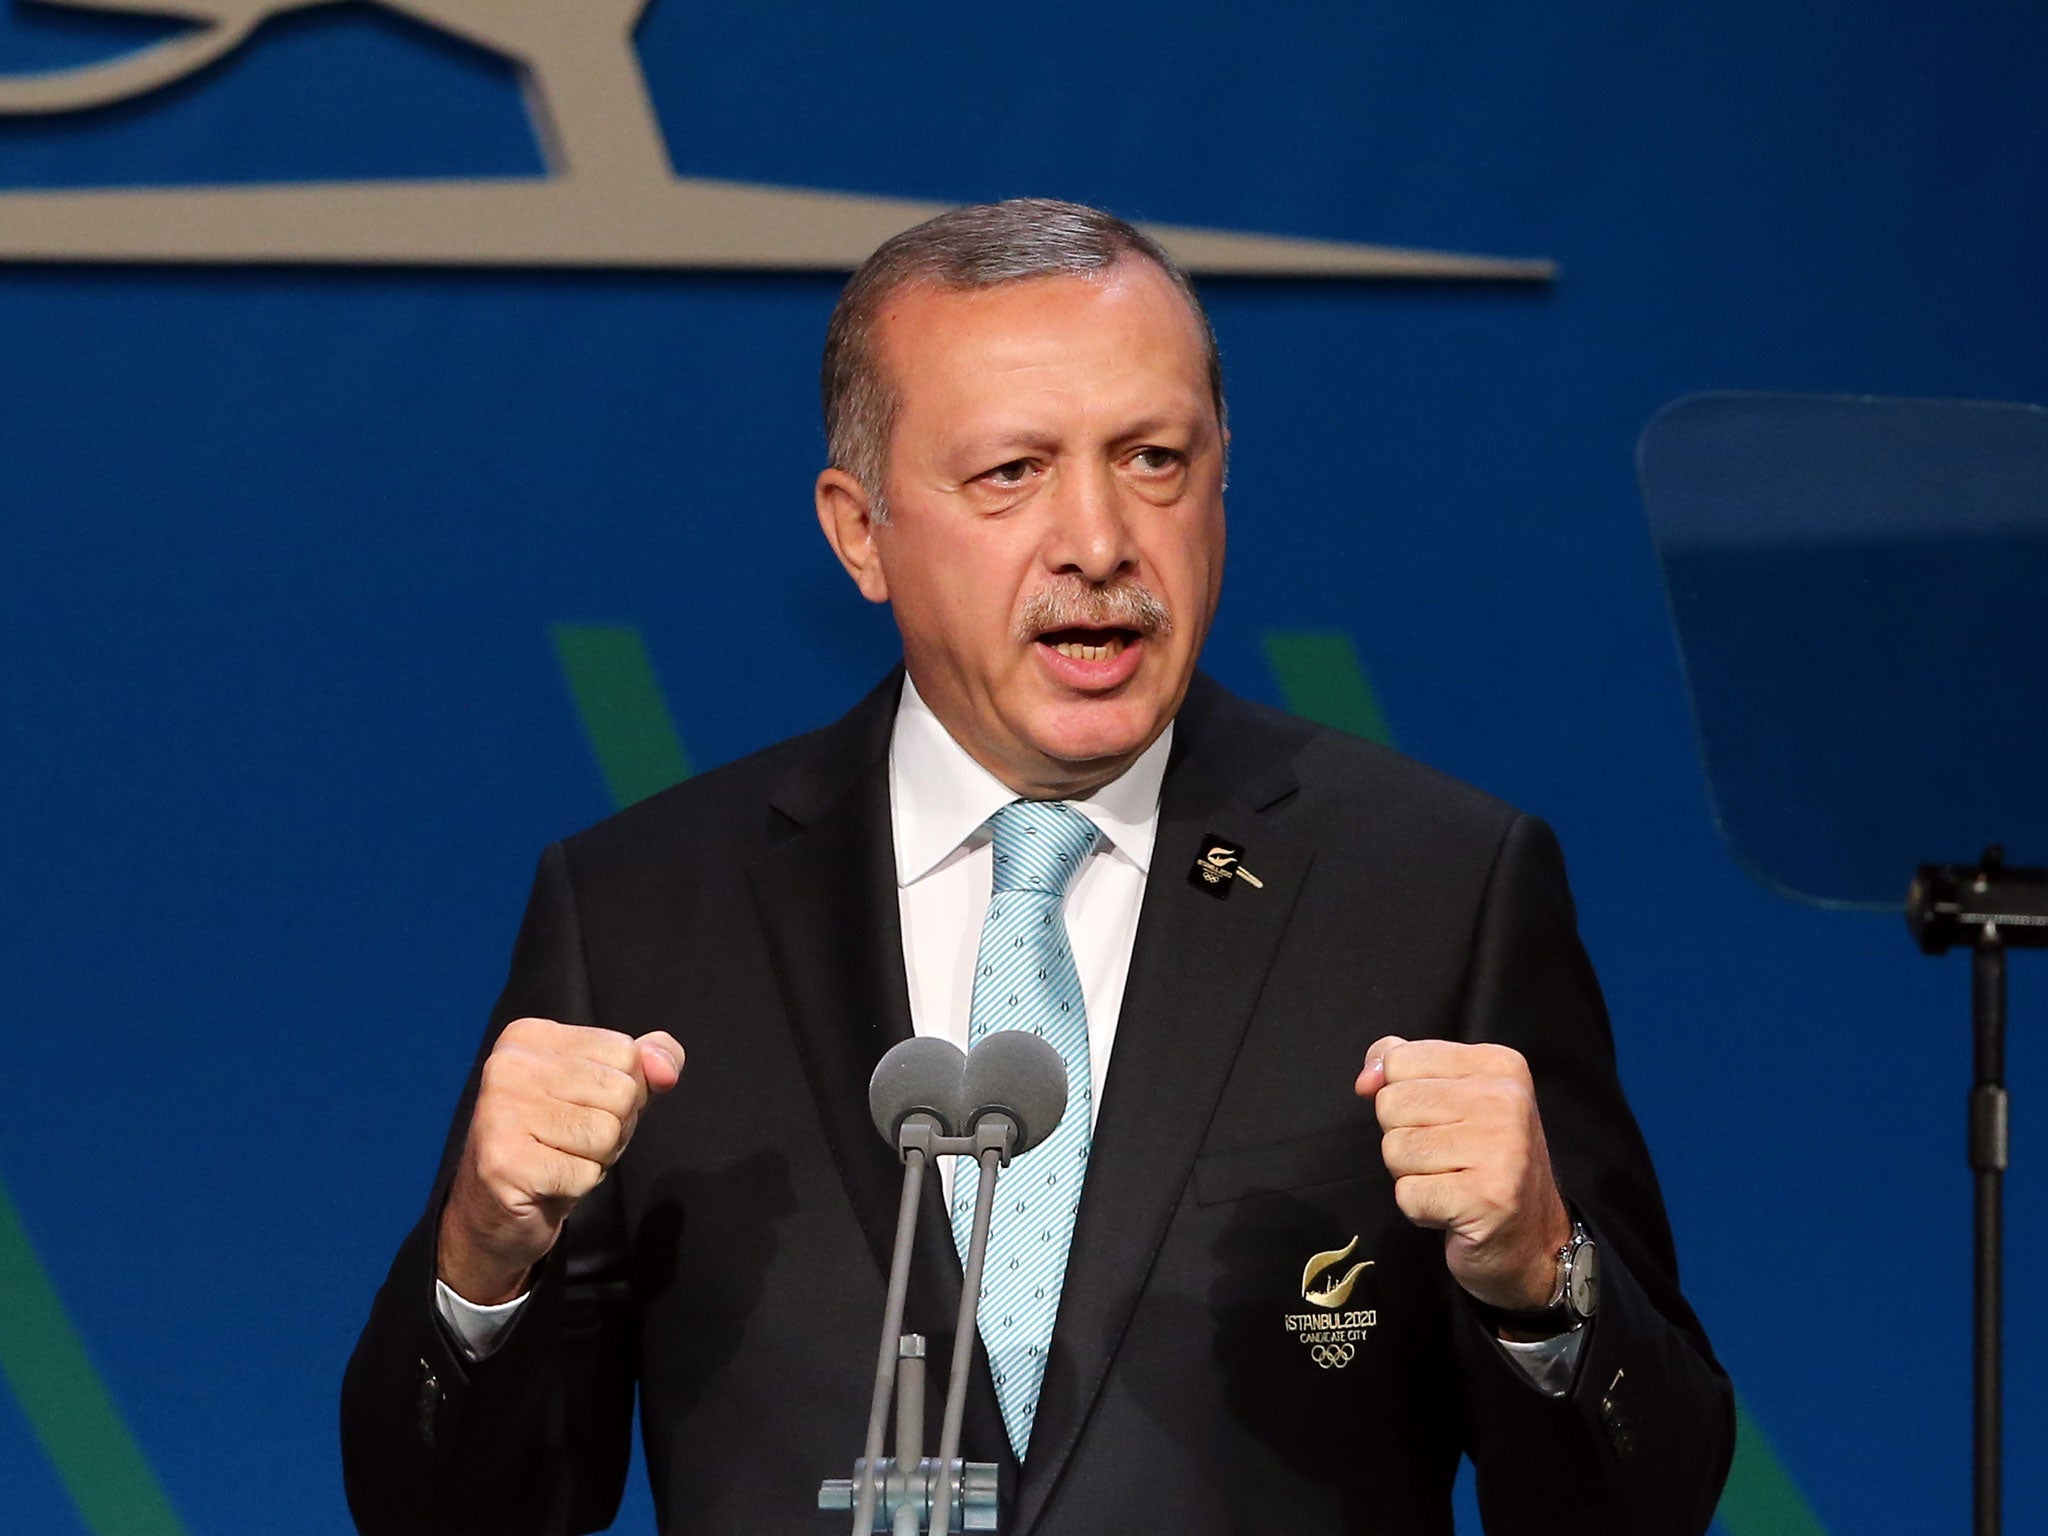 Prime Minister of Turkey, Recep Tayyip Erdogan speaks during the Istanbul 2020 bid presentation during the 125th IOC Session - 2020 Olympics Host City Announcement at Hilton Hotel on September 7, 2013 in Buenos Aires, Argentina.